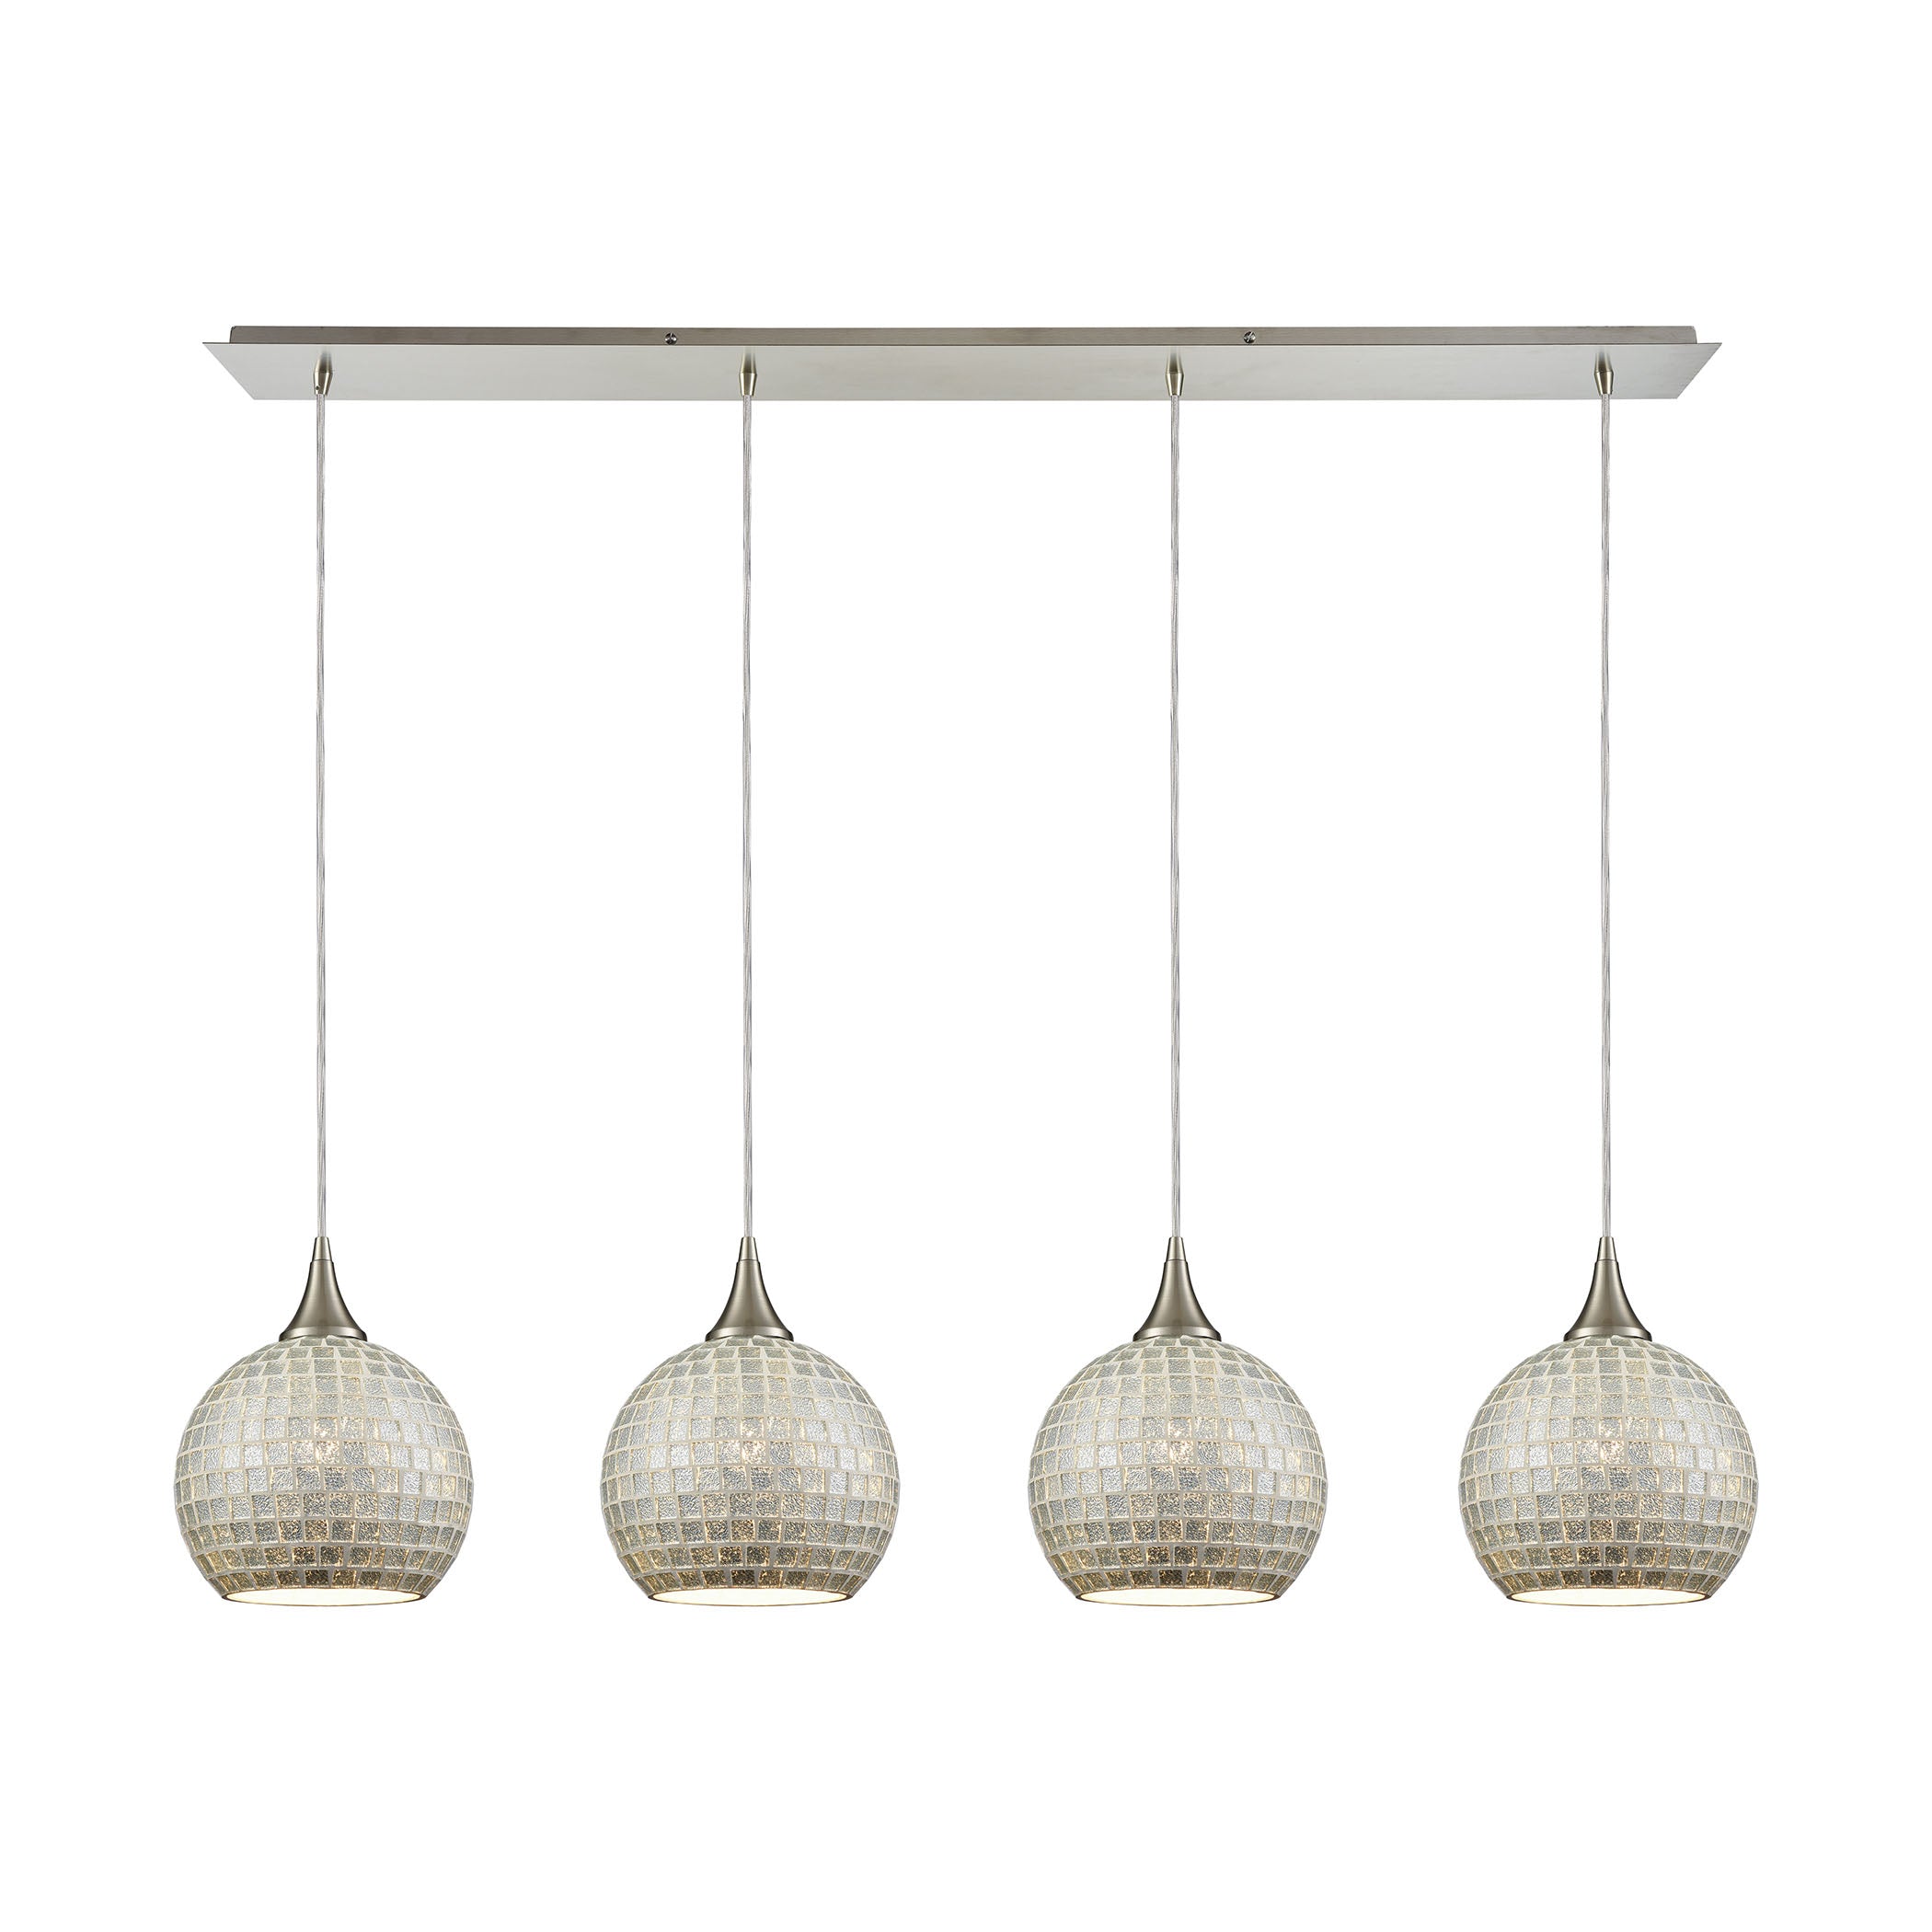 ELK Lighting 529-4LP-SLV Fusion 4-Light Linear Pendant Fixture in Satin Nickel with Silver Mosaic Glass